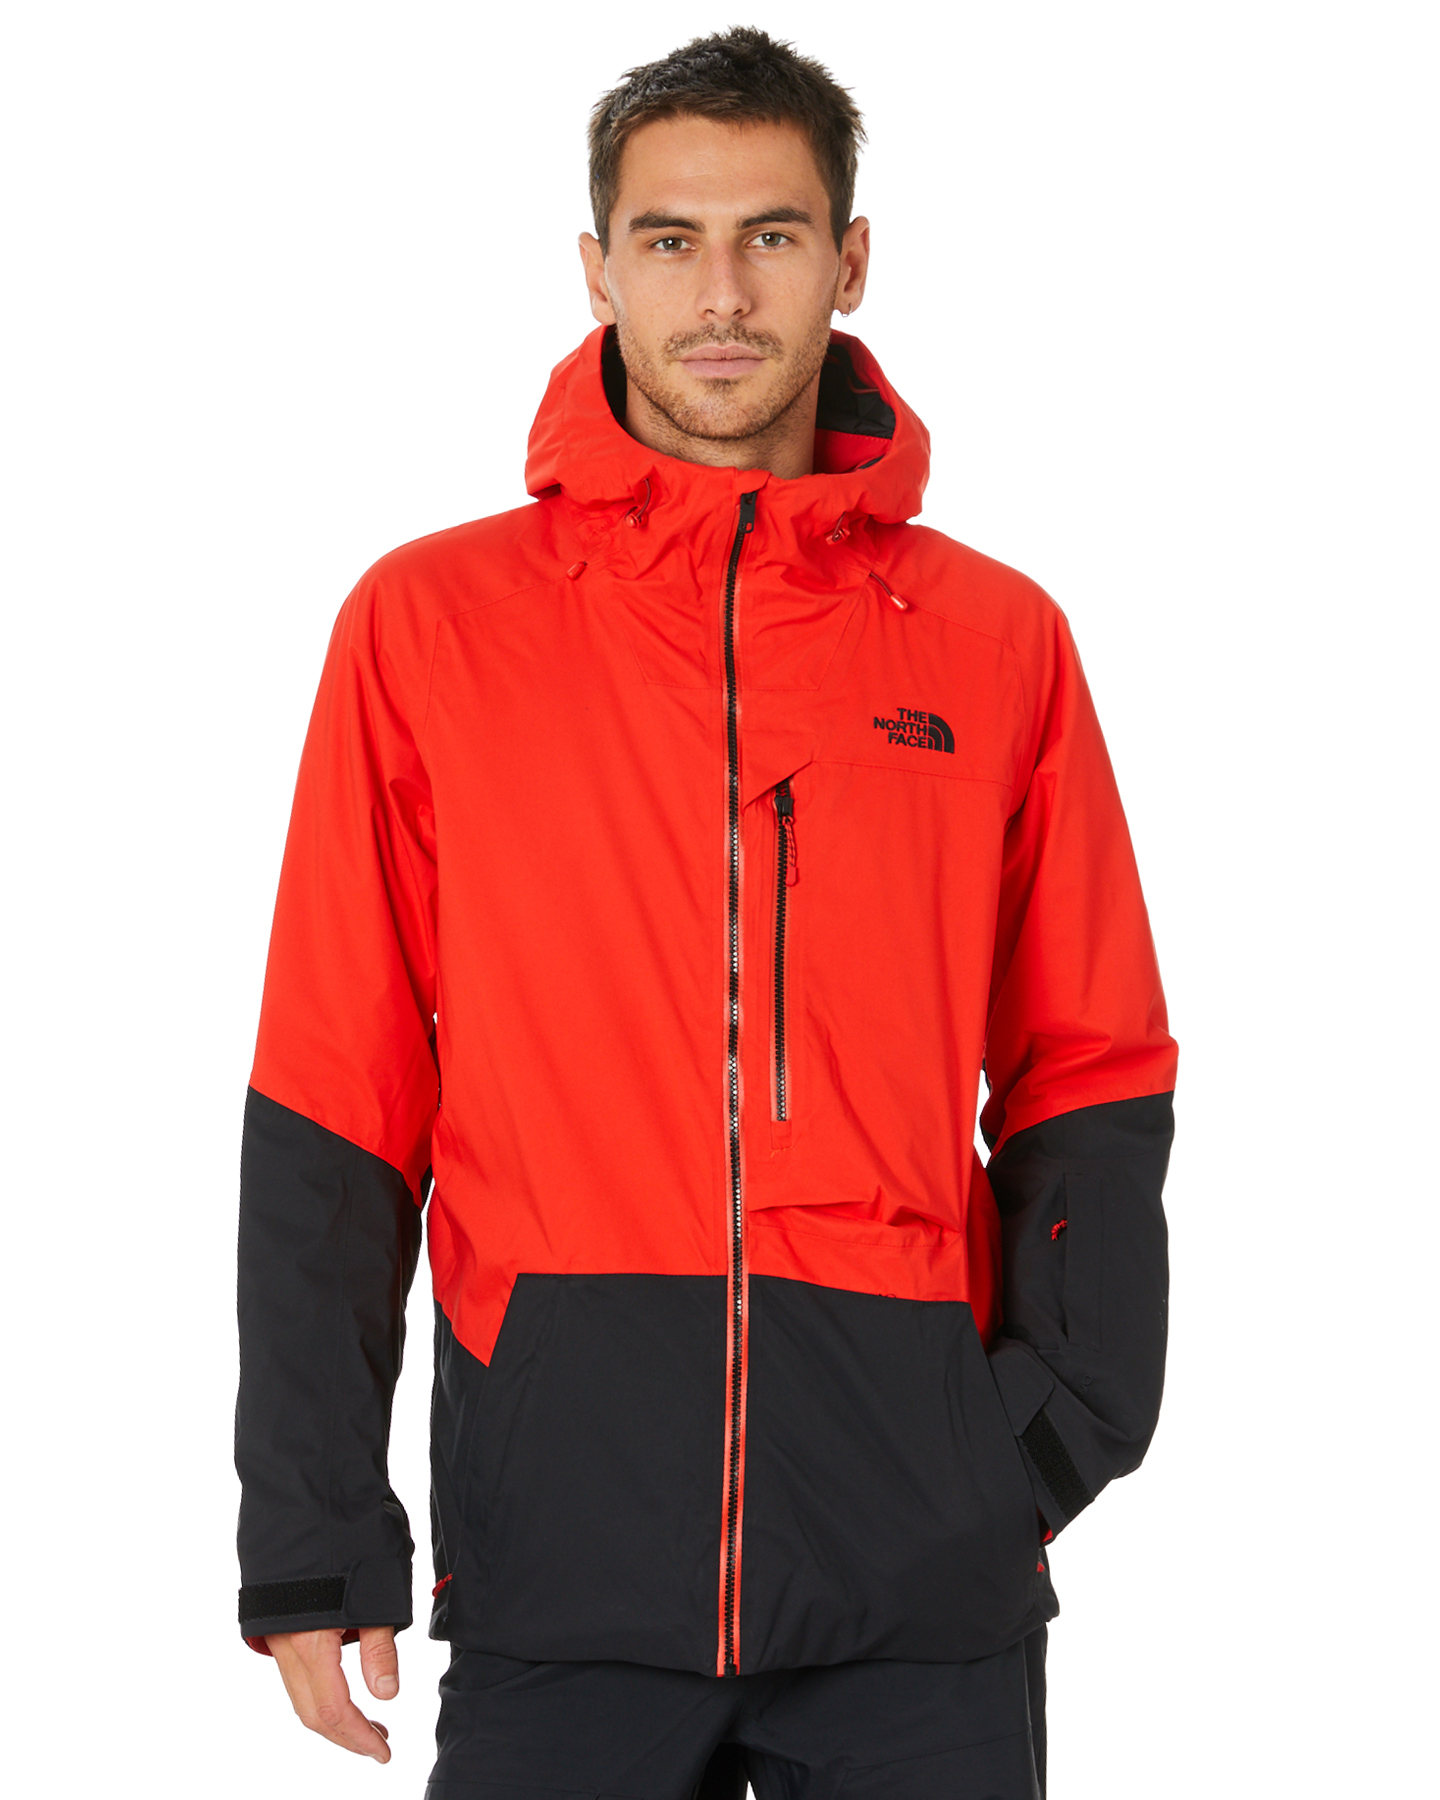 The North Face Mens Sickline Snow Jacket - Fiery Red Tnf Black | SurfStitch